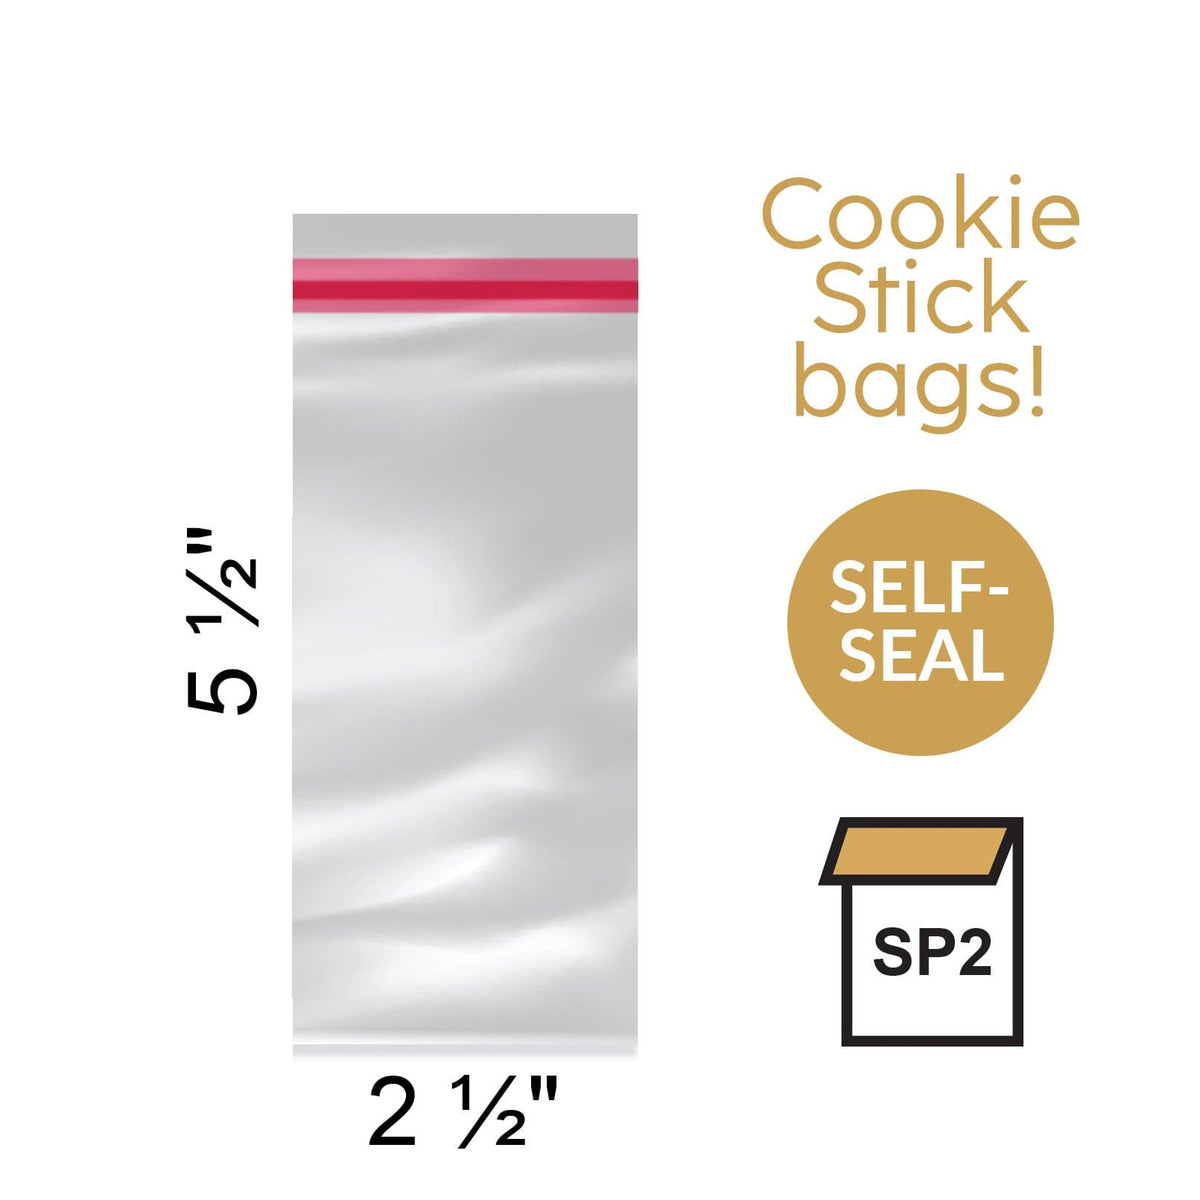 Clear Lip & Tape Bags 4 1/4 x 5 1/8 - Pack of 100